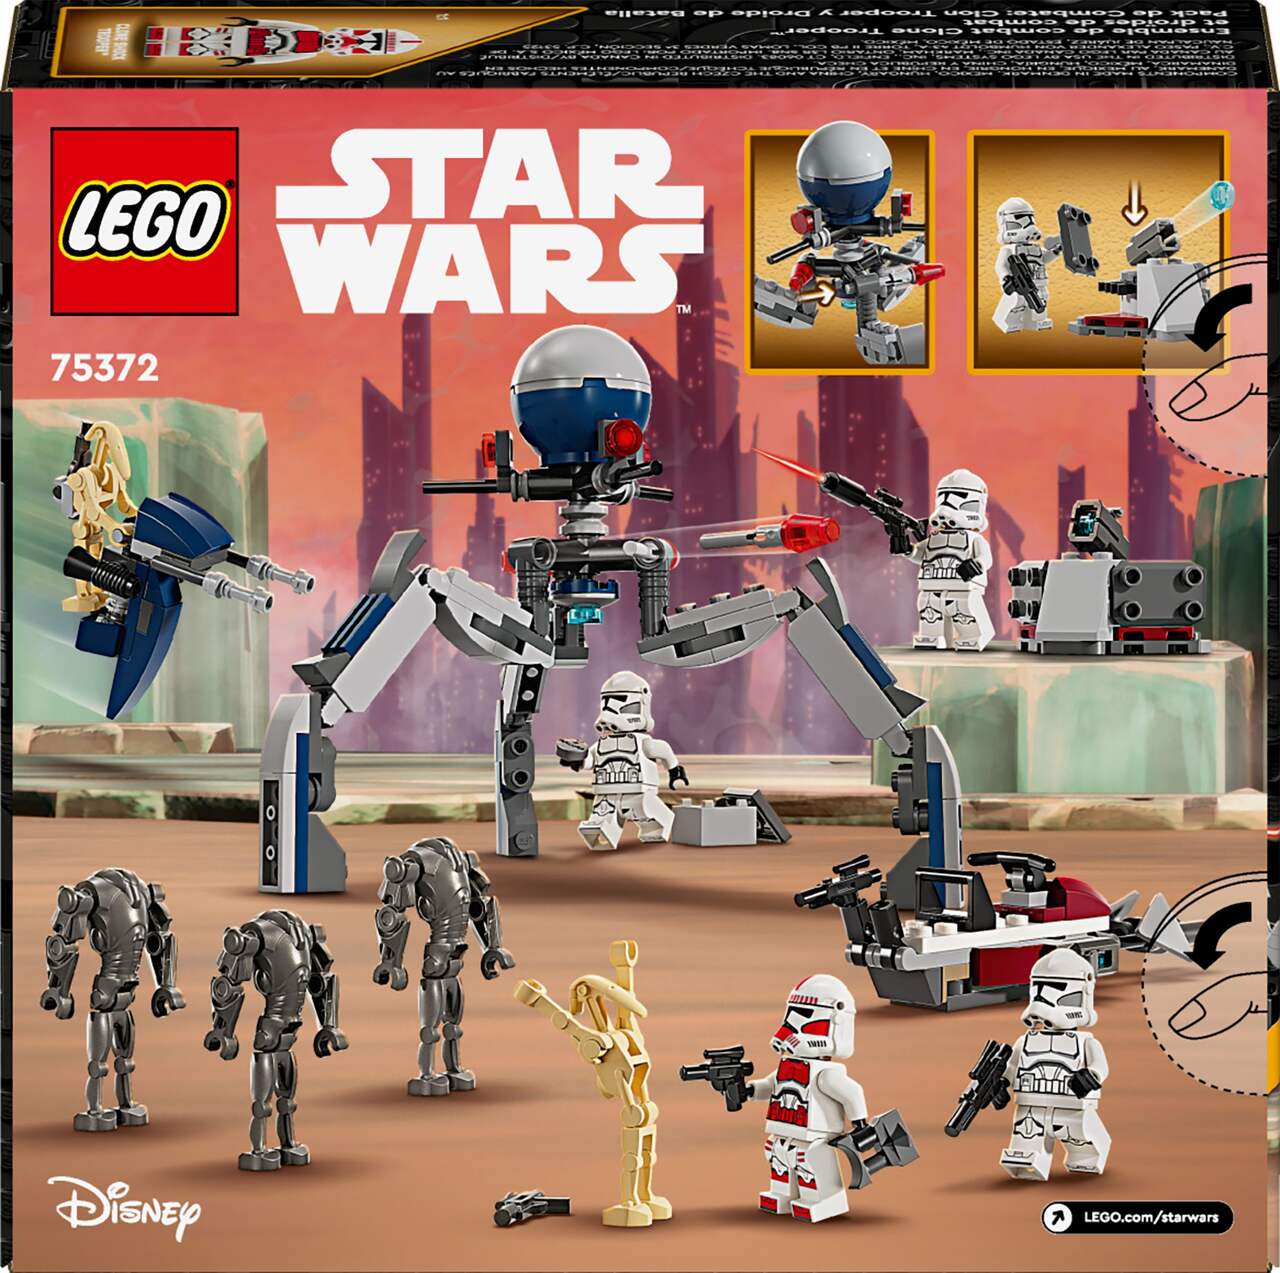 Ferry Droid Accessory Set Arrives at Droid Depot in Star Wars